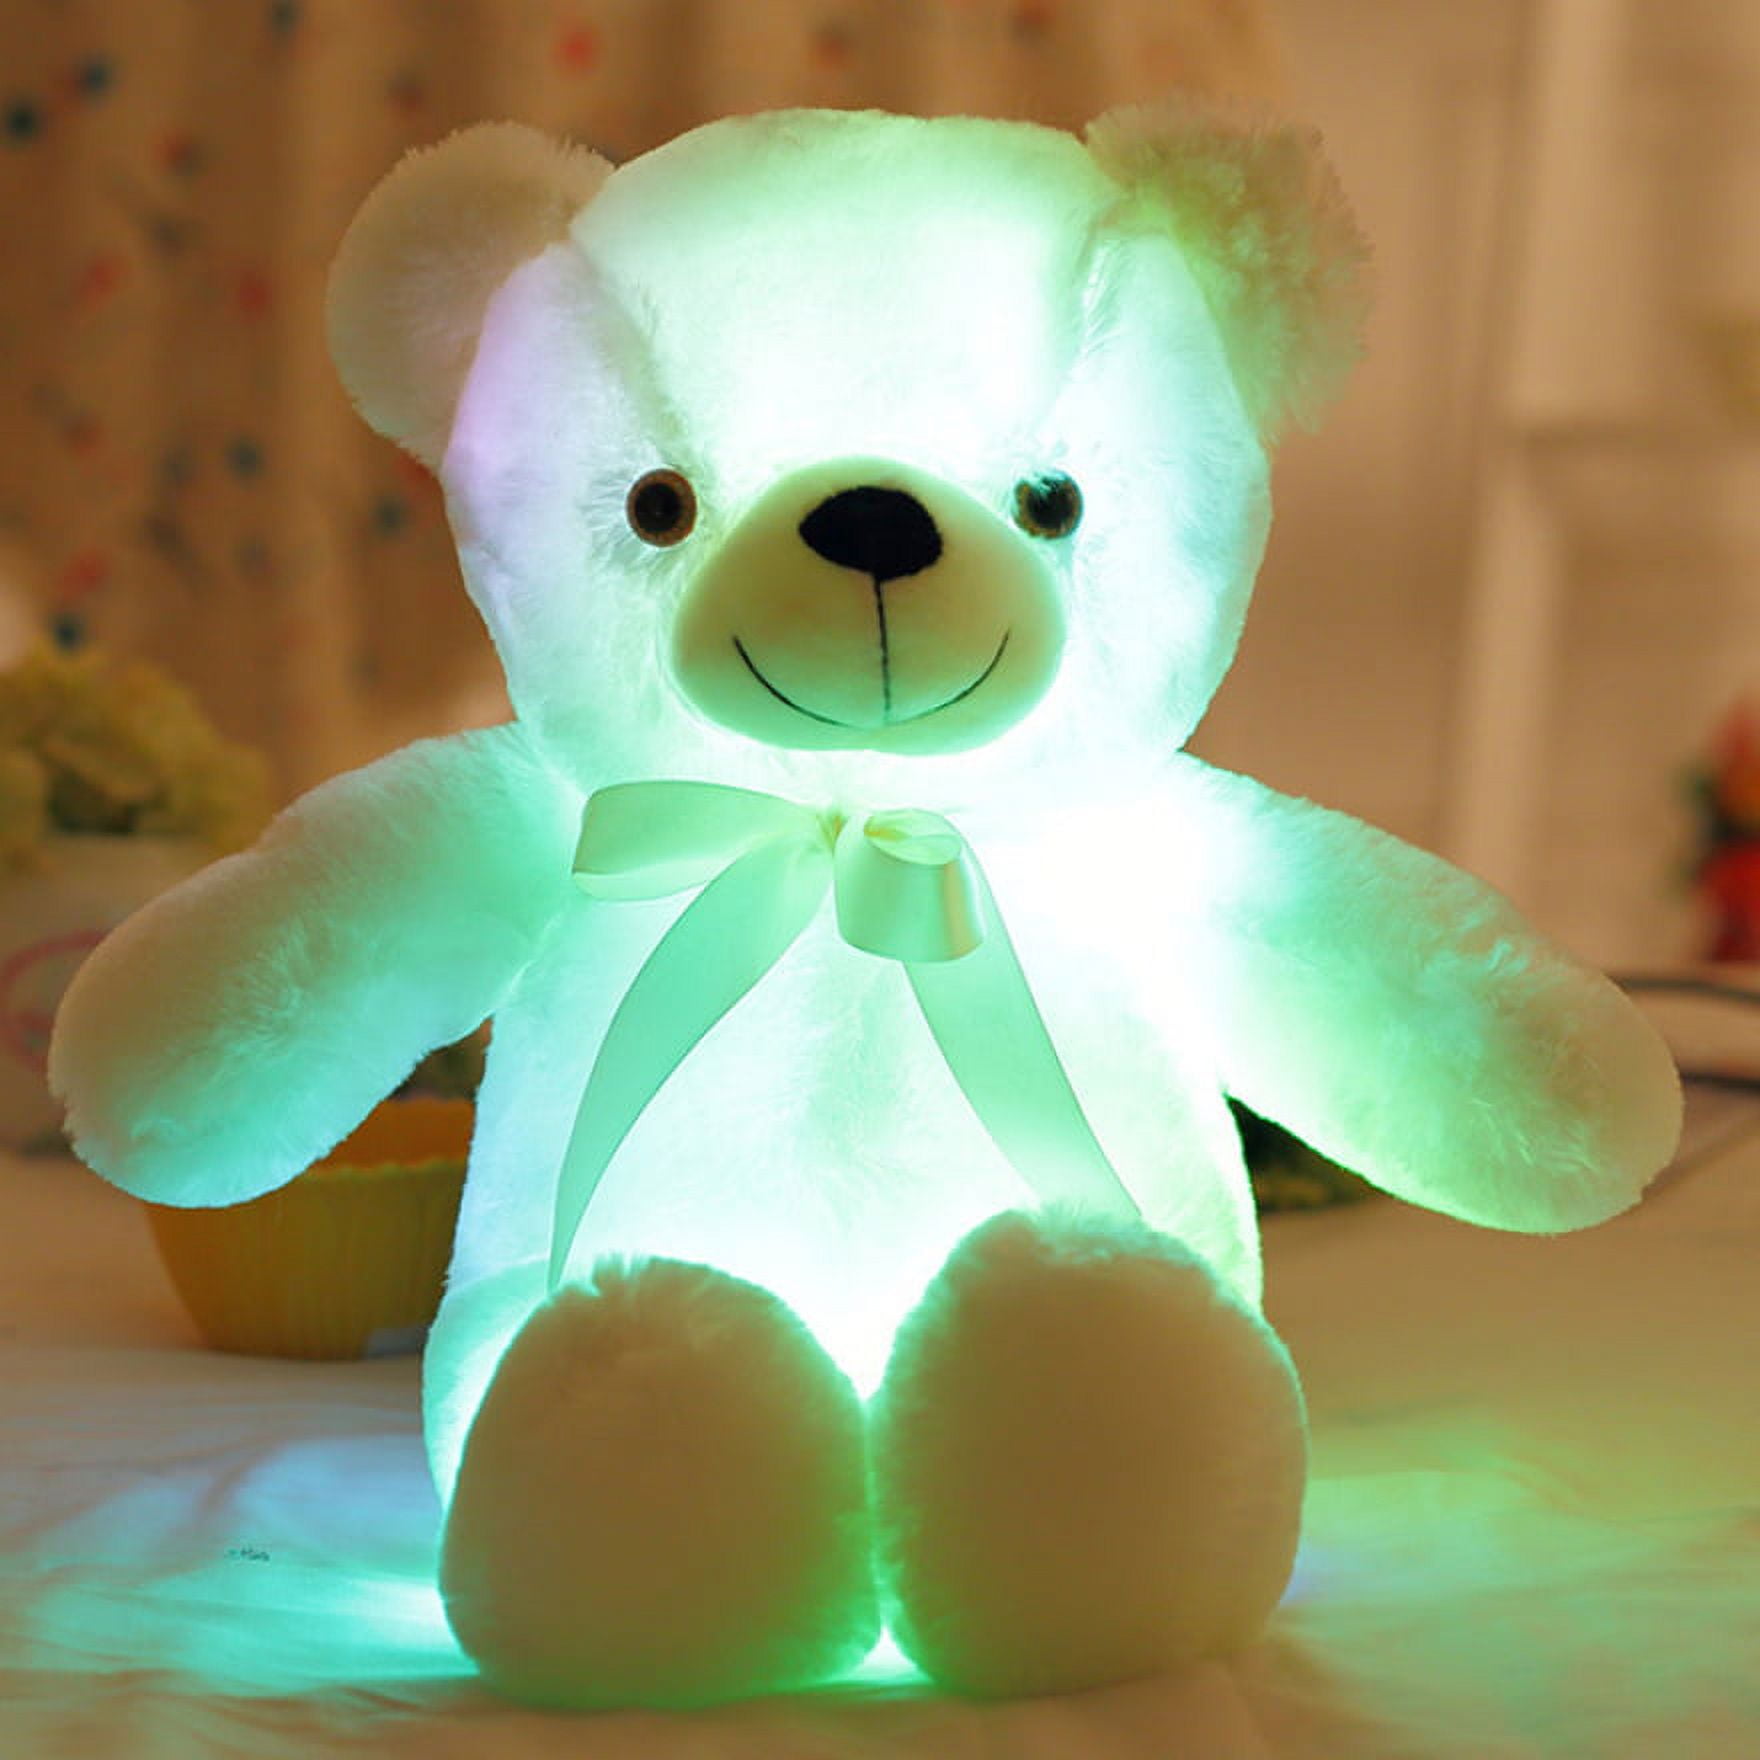 Jzenzero Glow Stuffed Creatives Toy Plush New Up Light Adults with Teddy Animal Kids Soft Bear For Bow-tie LED